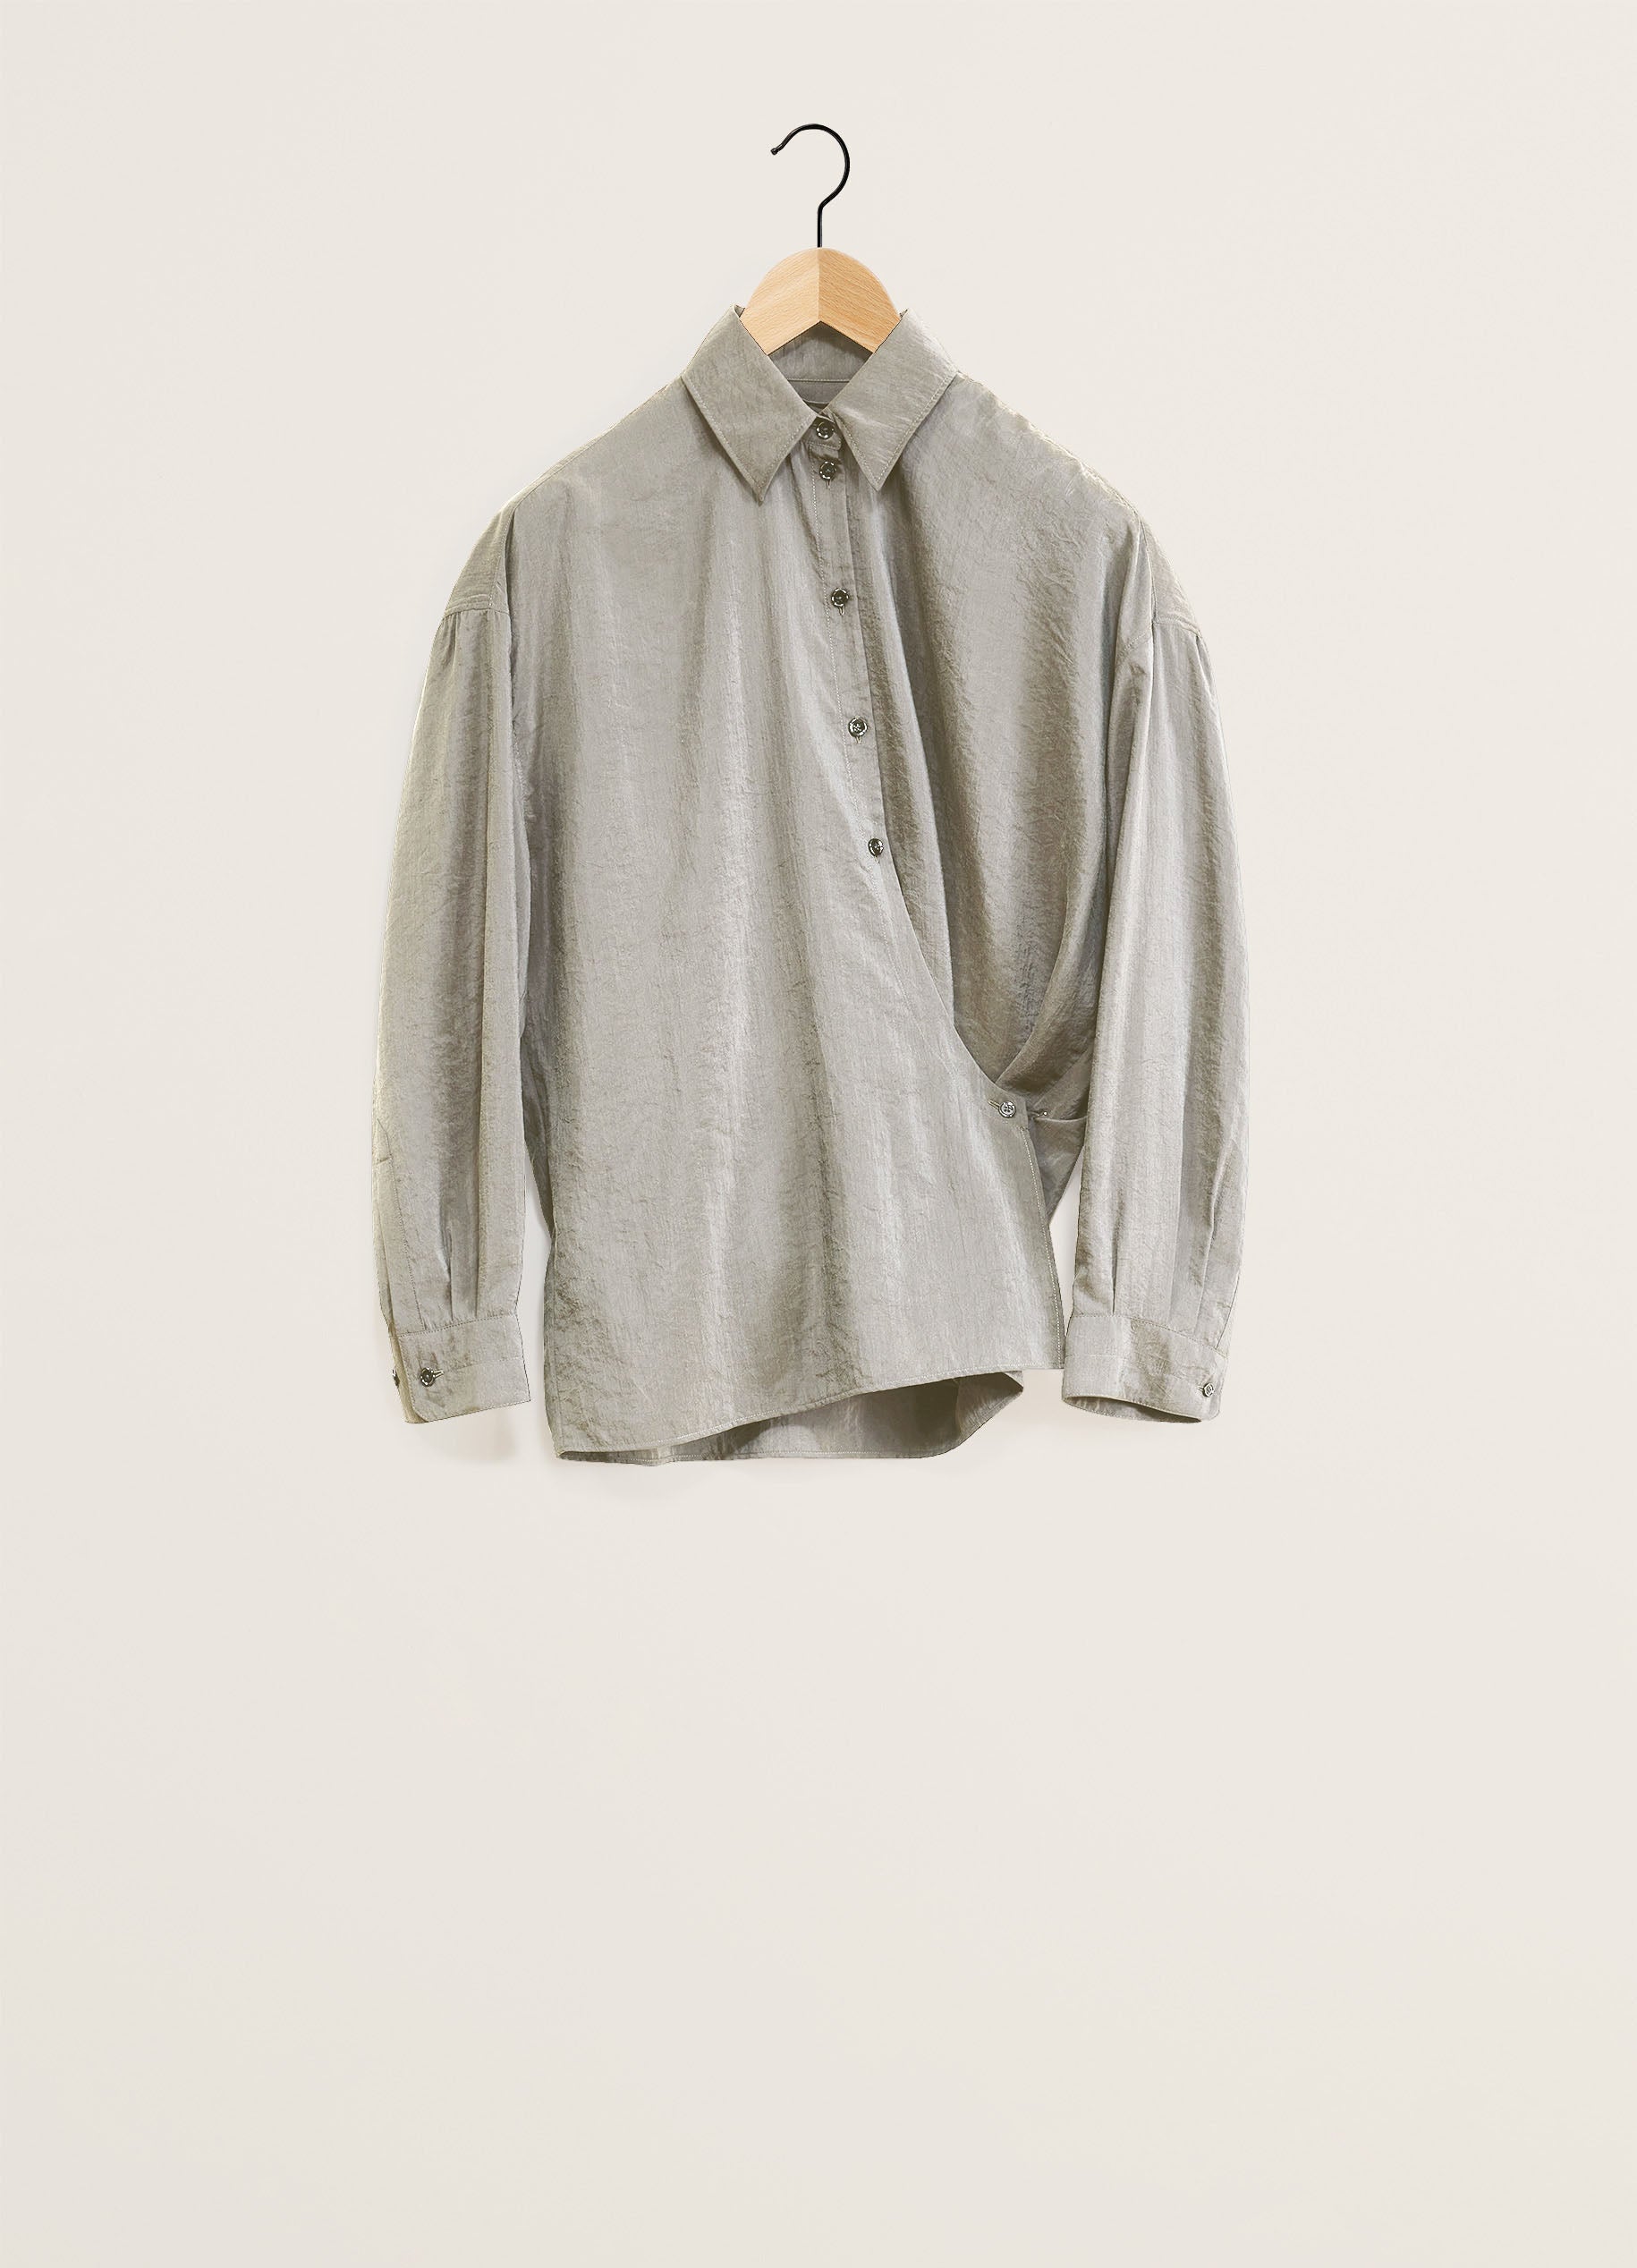 Twisted High Collar Shirt in Light Misty Grey | LEMAIRE